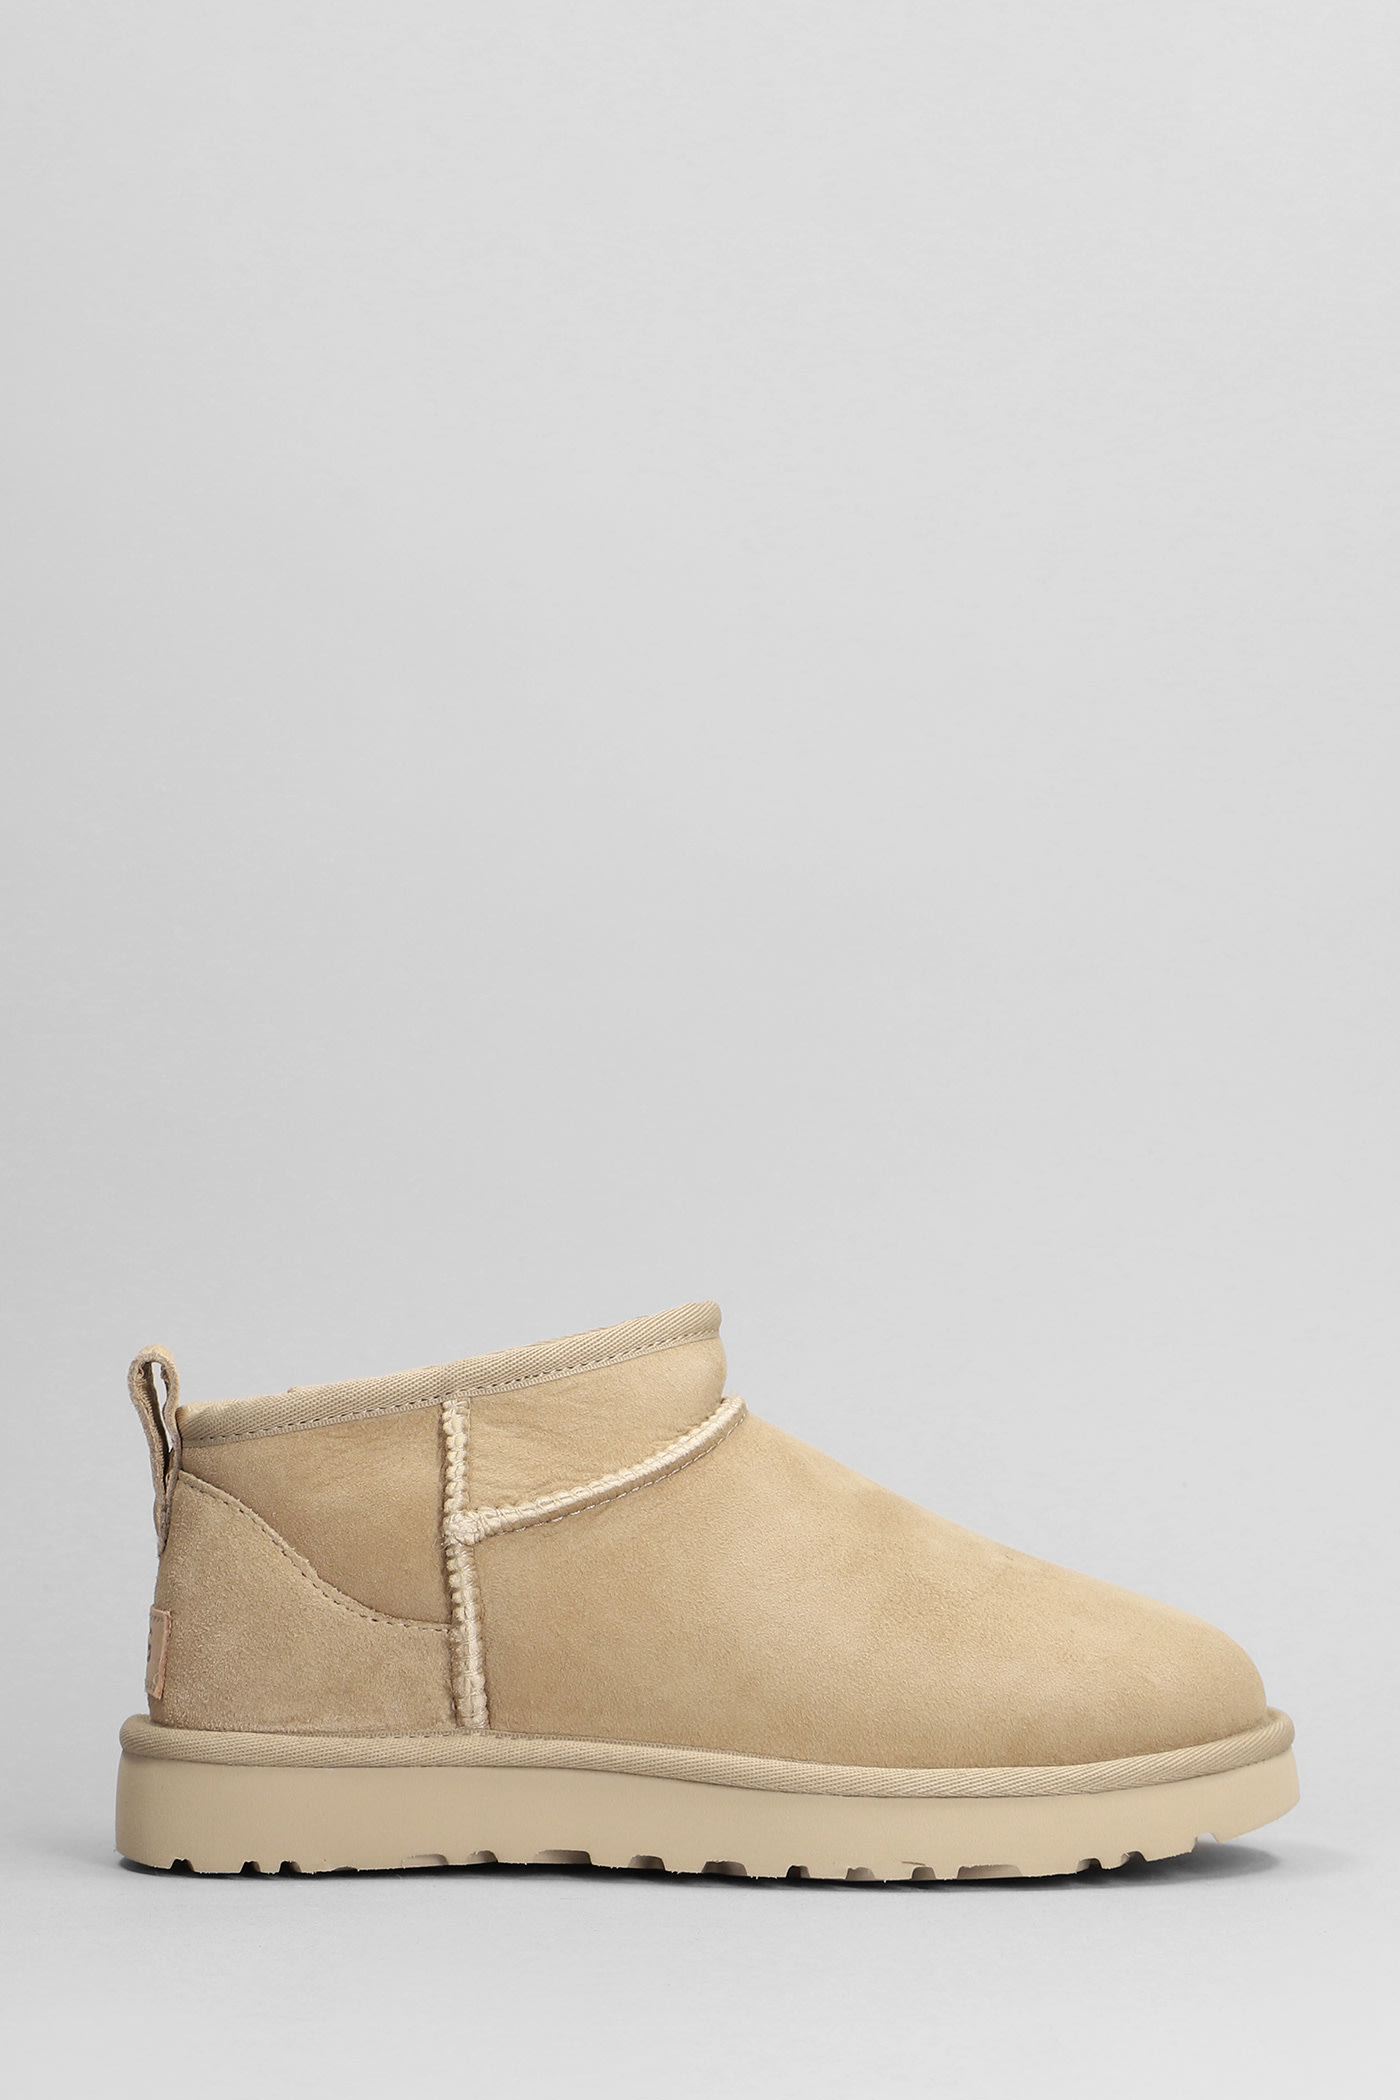 Classic Ultra Mini Low Heels Ankle Boots In Beige Suede